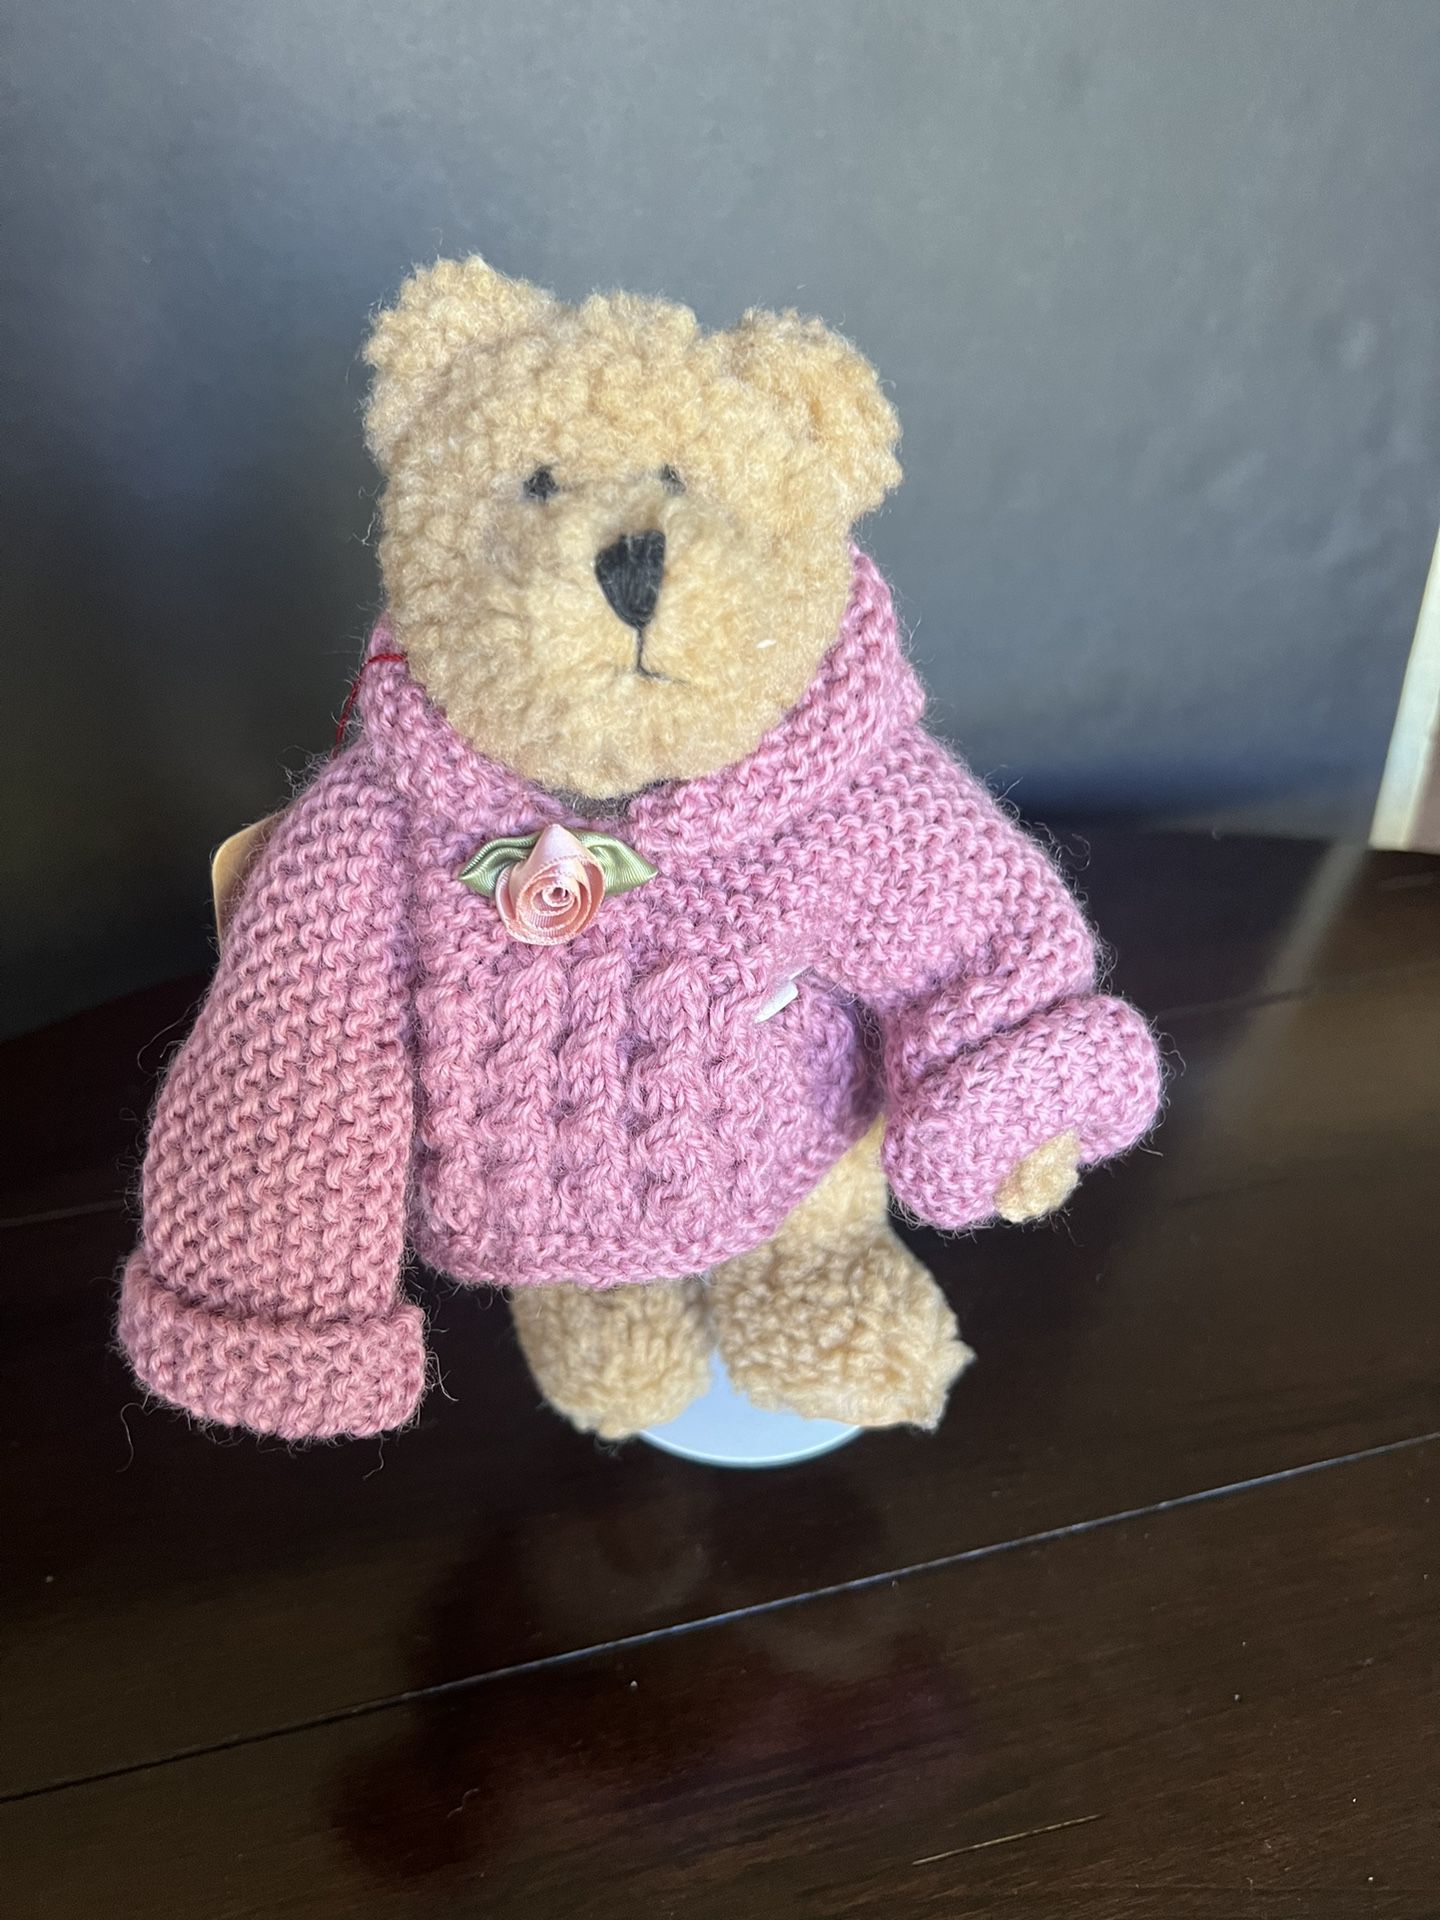 Boyd's Bears Plush Investment Collectable Mauve Sweater